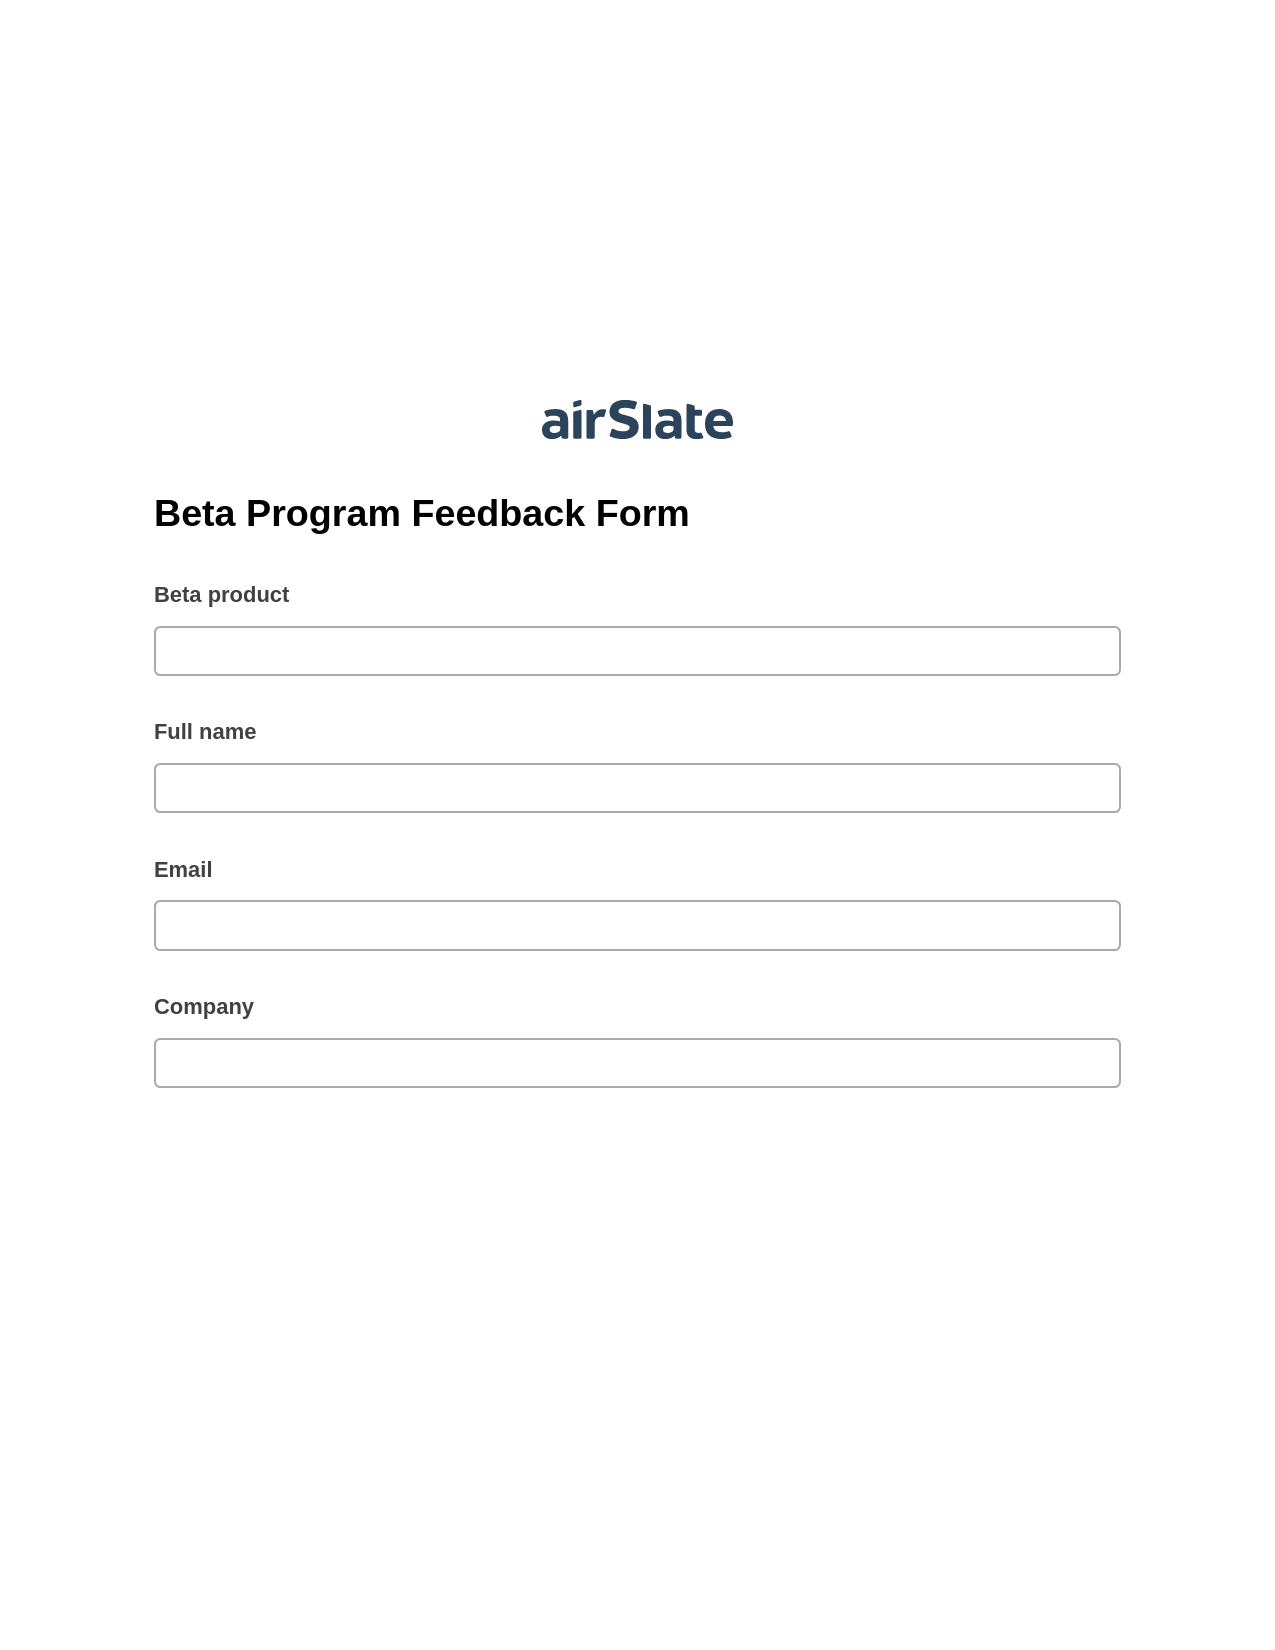 Multirole Beta Program Feedback Form Pre-fill from Salesforce Records with SOQL Bot, Send a Slate with Roles Bot, Archive to SharePoint Folder Bot